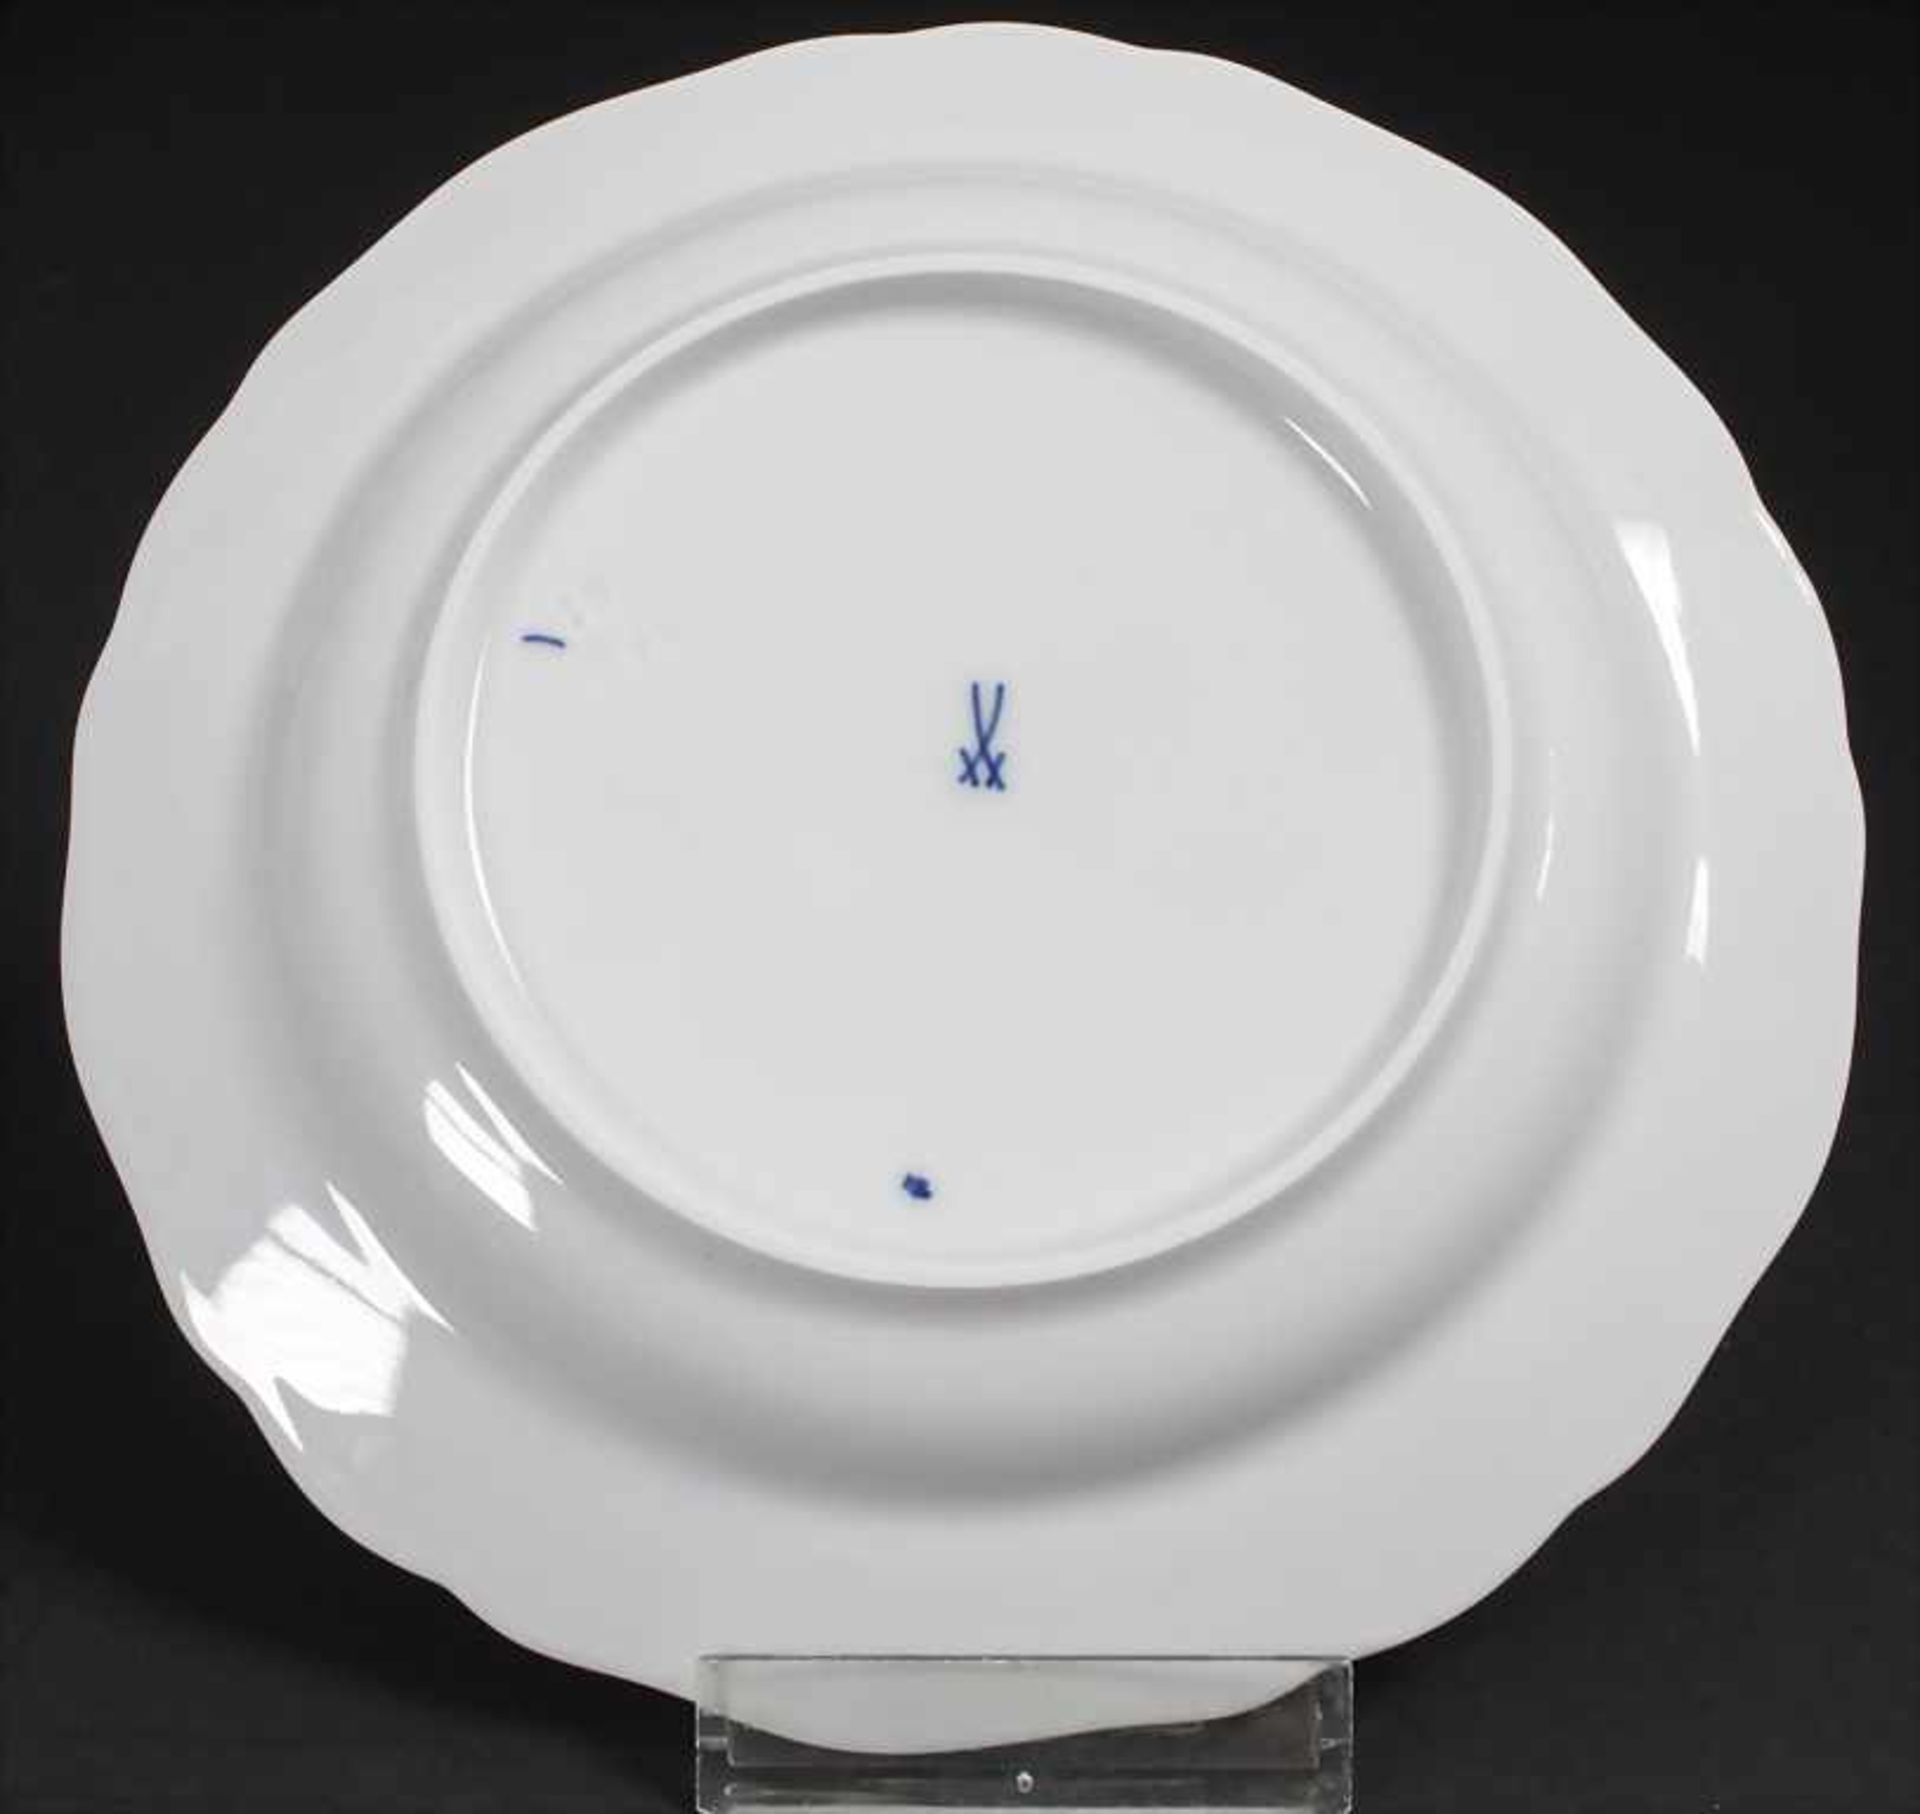 28 tlg. Service 'Zwiebelmuster' / A 28-piece dinner set with 'Onion Pattern', Meissen, 20. Jh. - Image 16 of 17